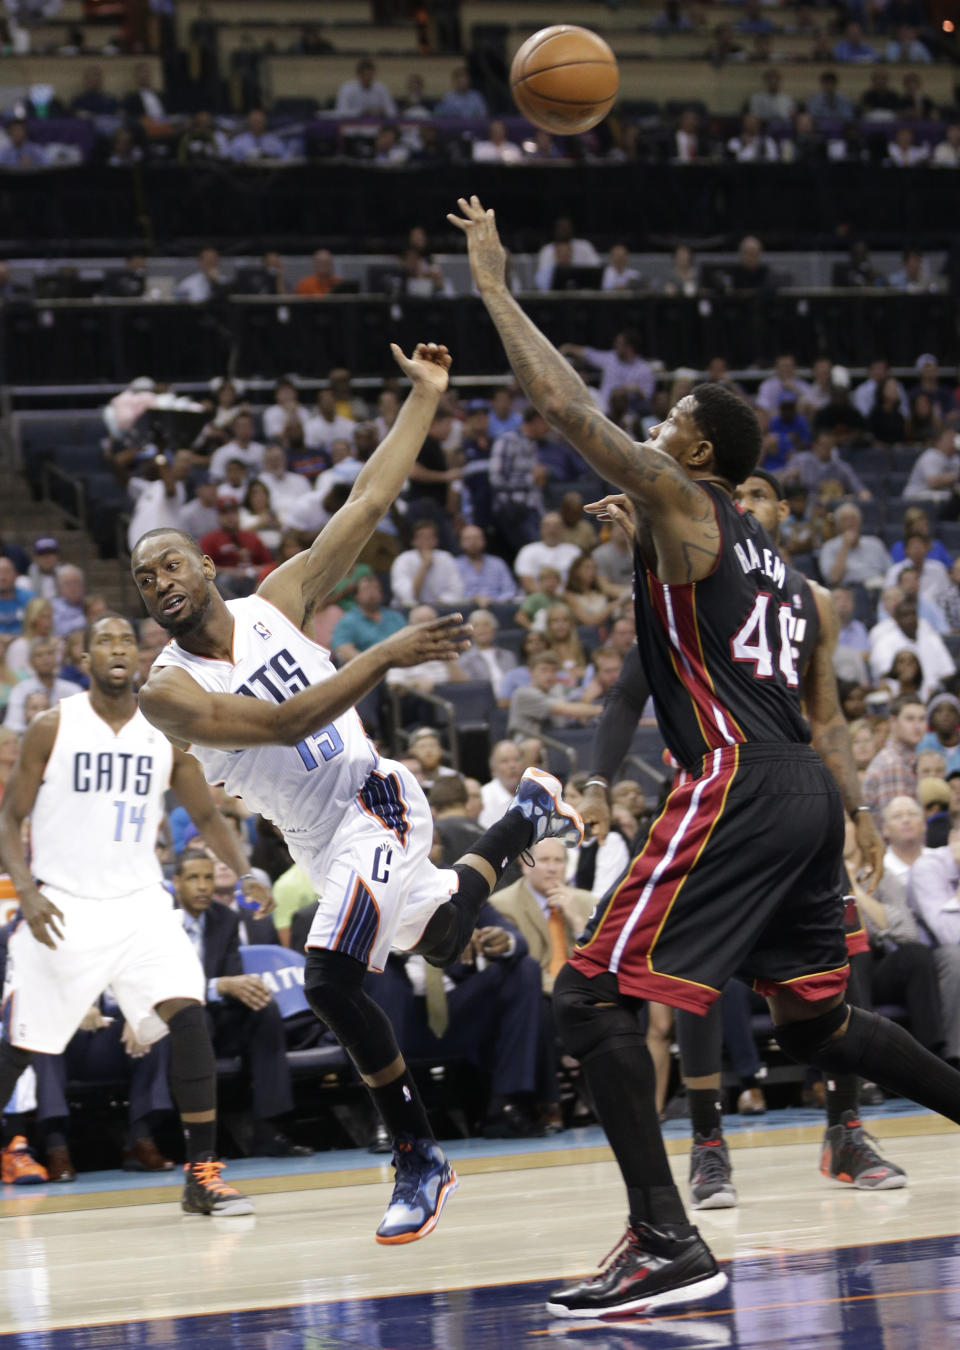 Charlotte Bobcats' Kemba Walker (15) is fouled by Miami Heat's Udonis Haslem (40) during the first half in Game 4 of an opening-round NBA basketball playoff series in Charlotte, N.C., Monday, April 28, 2014. (AP Photo/Chuck Burton)